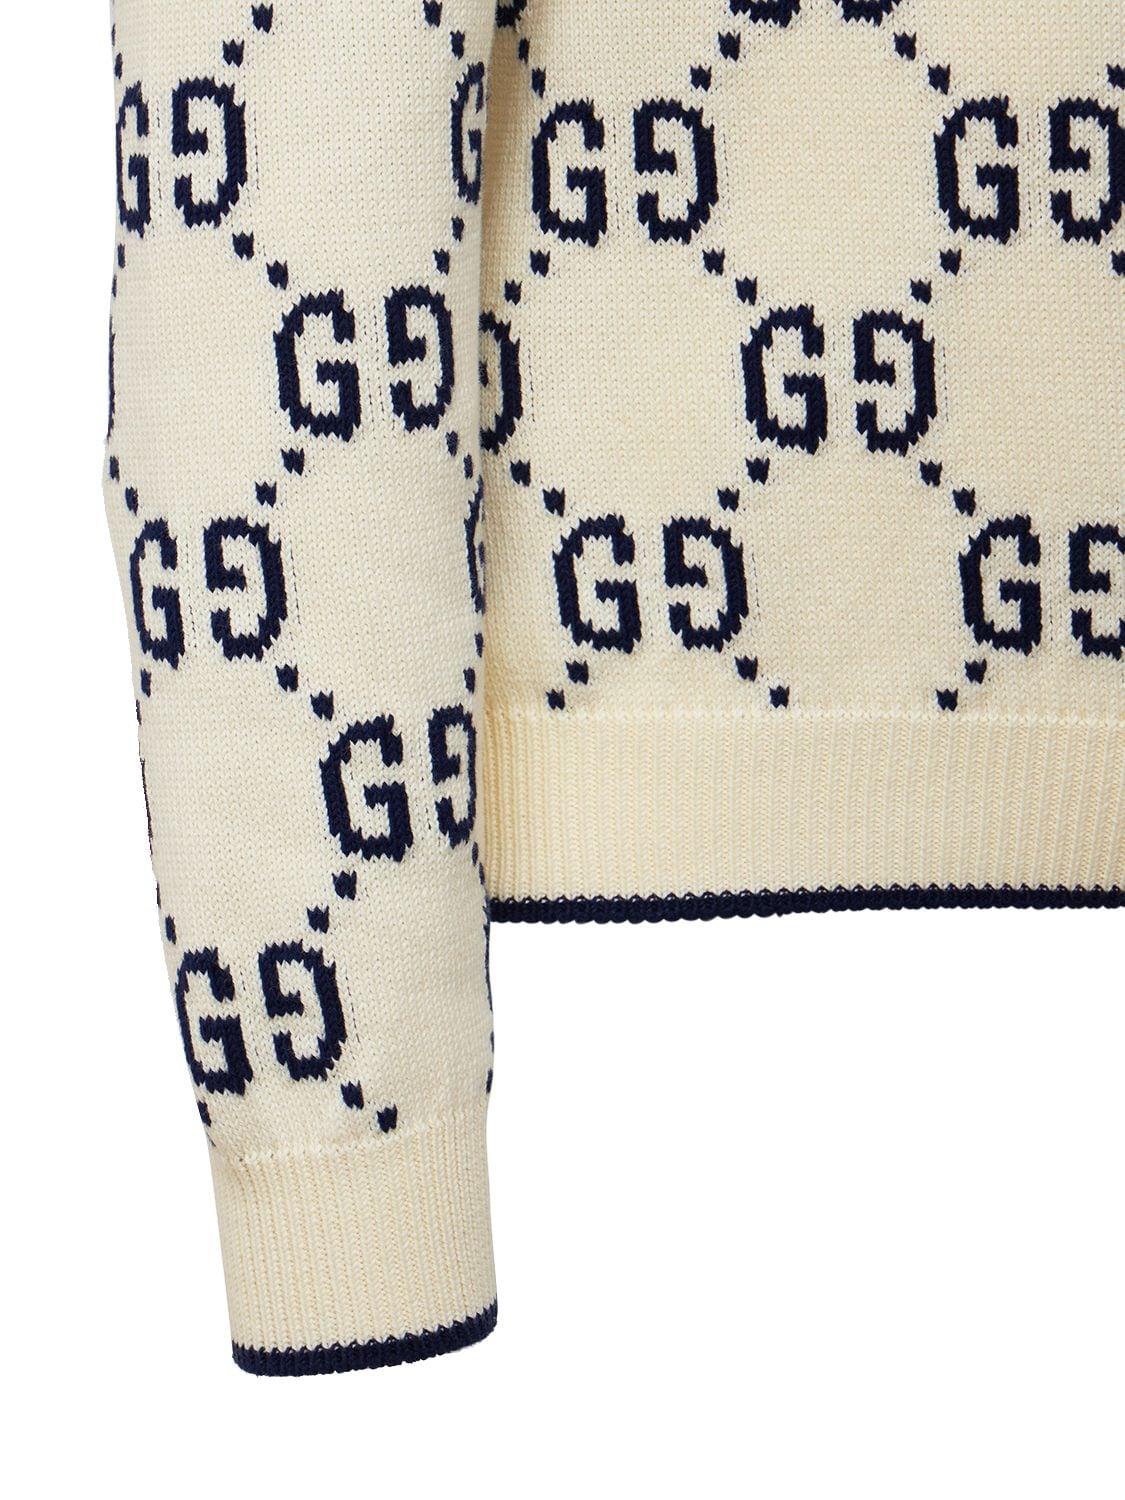 Shop Gucci Gg Cotton Knit Sweater In Ivory,ink